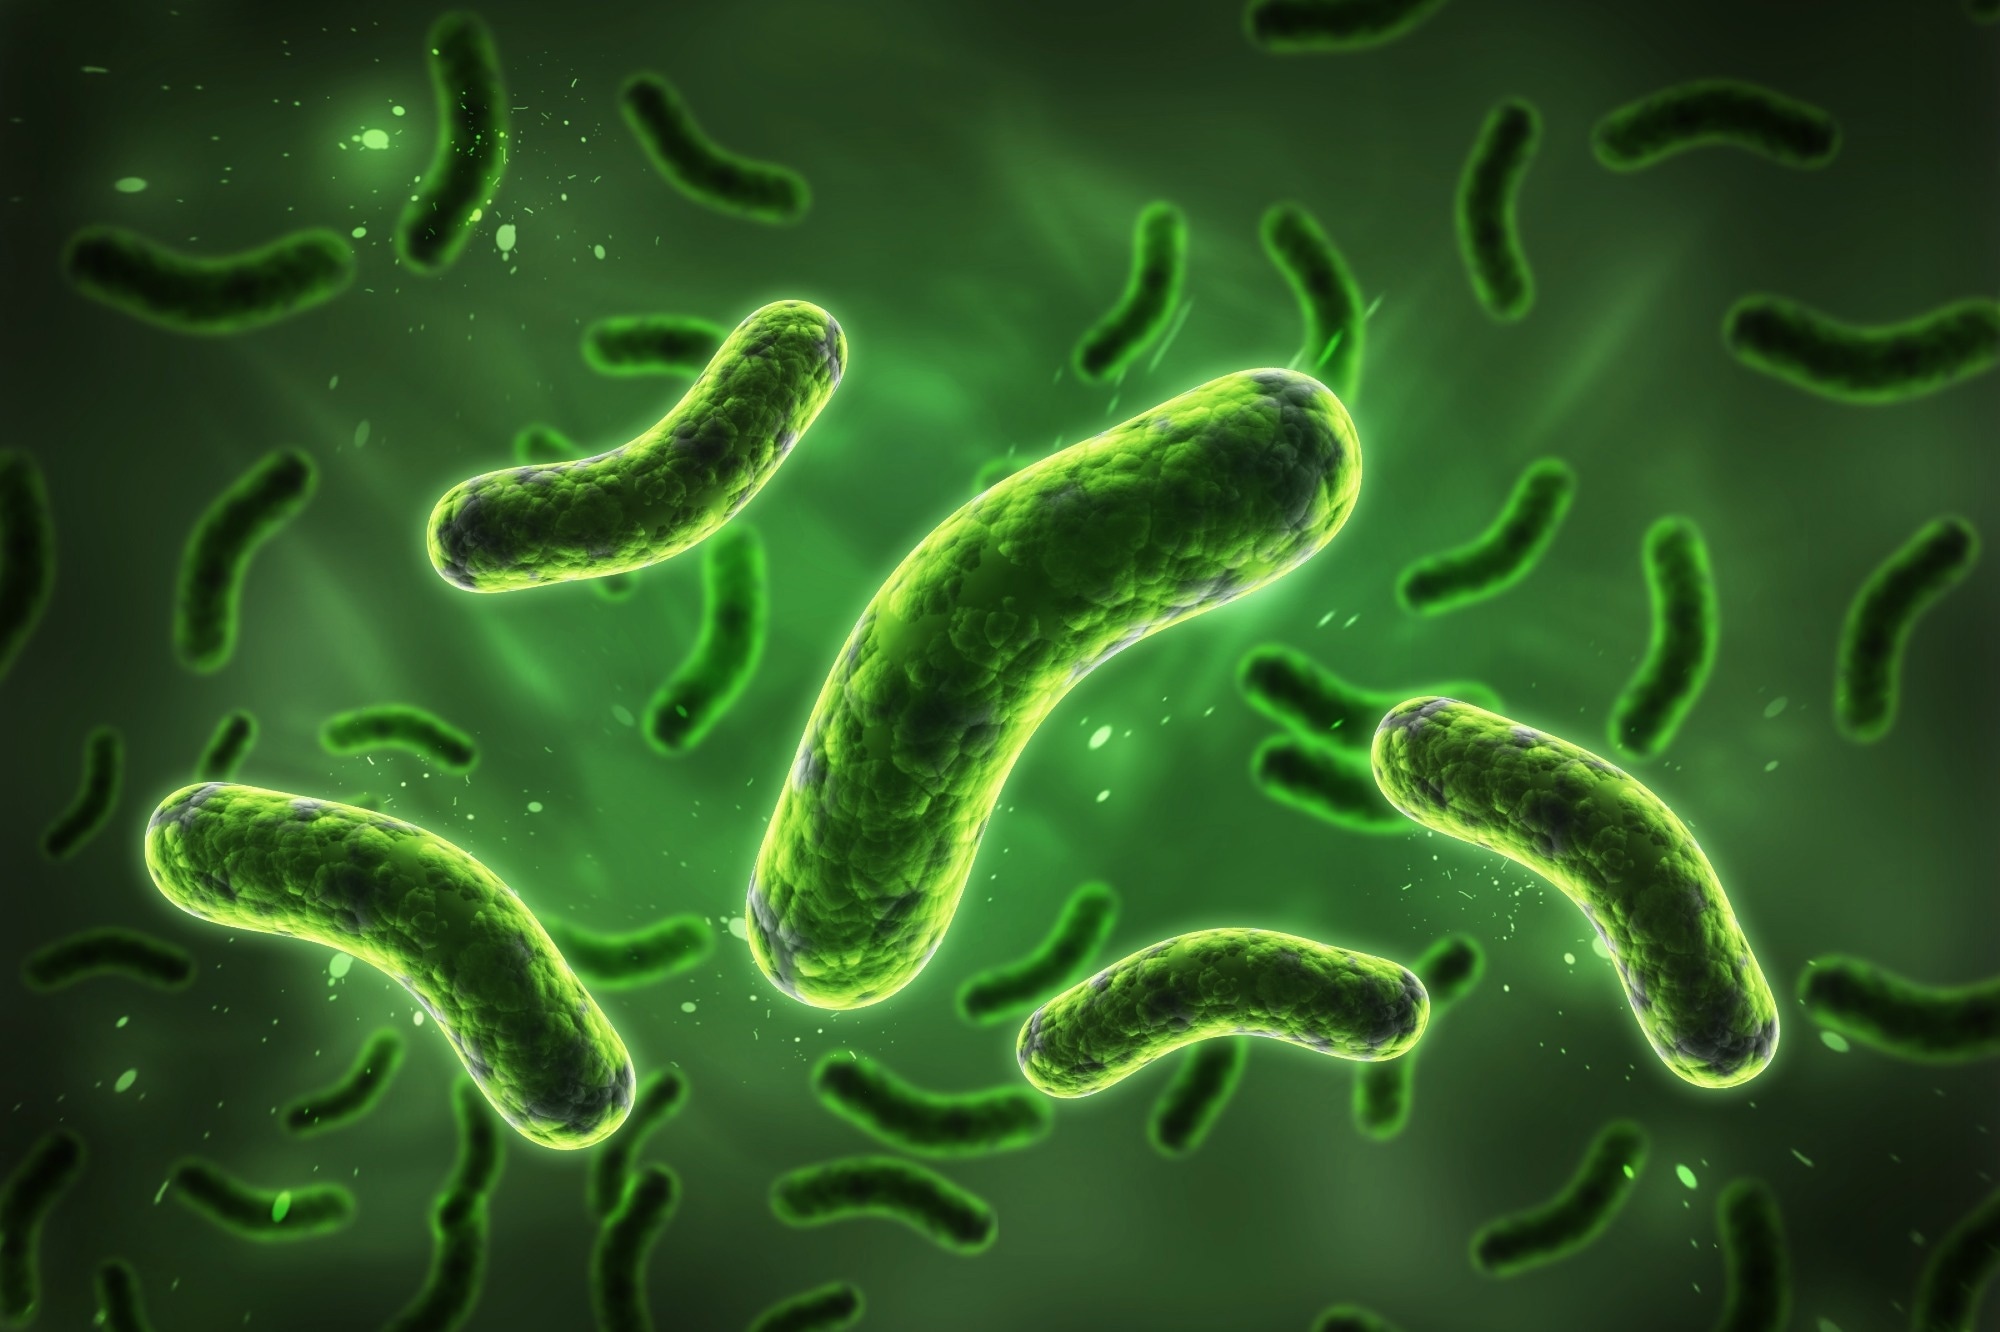 Study: Microbiota-Induced Epigenetic Alterations in Depressive Disorders Are Targets for Nutritional and Probiotic Therapies. Image Credit: RAJ CREATIONSZ / Shutterstock.com